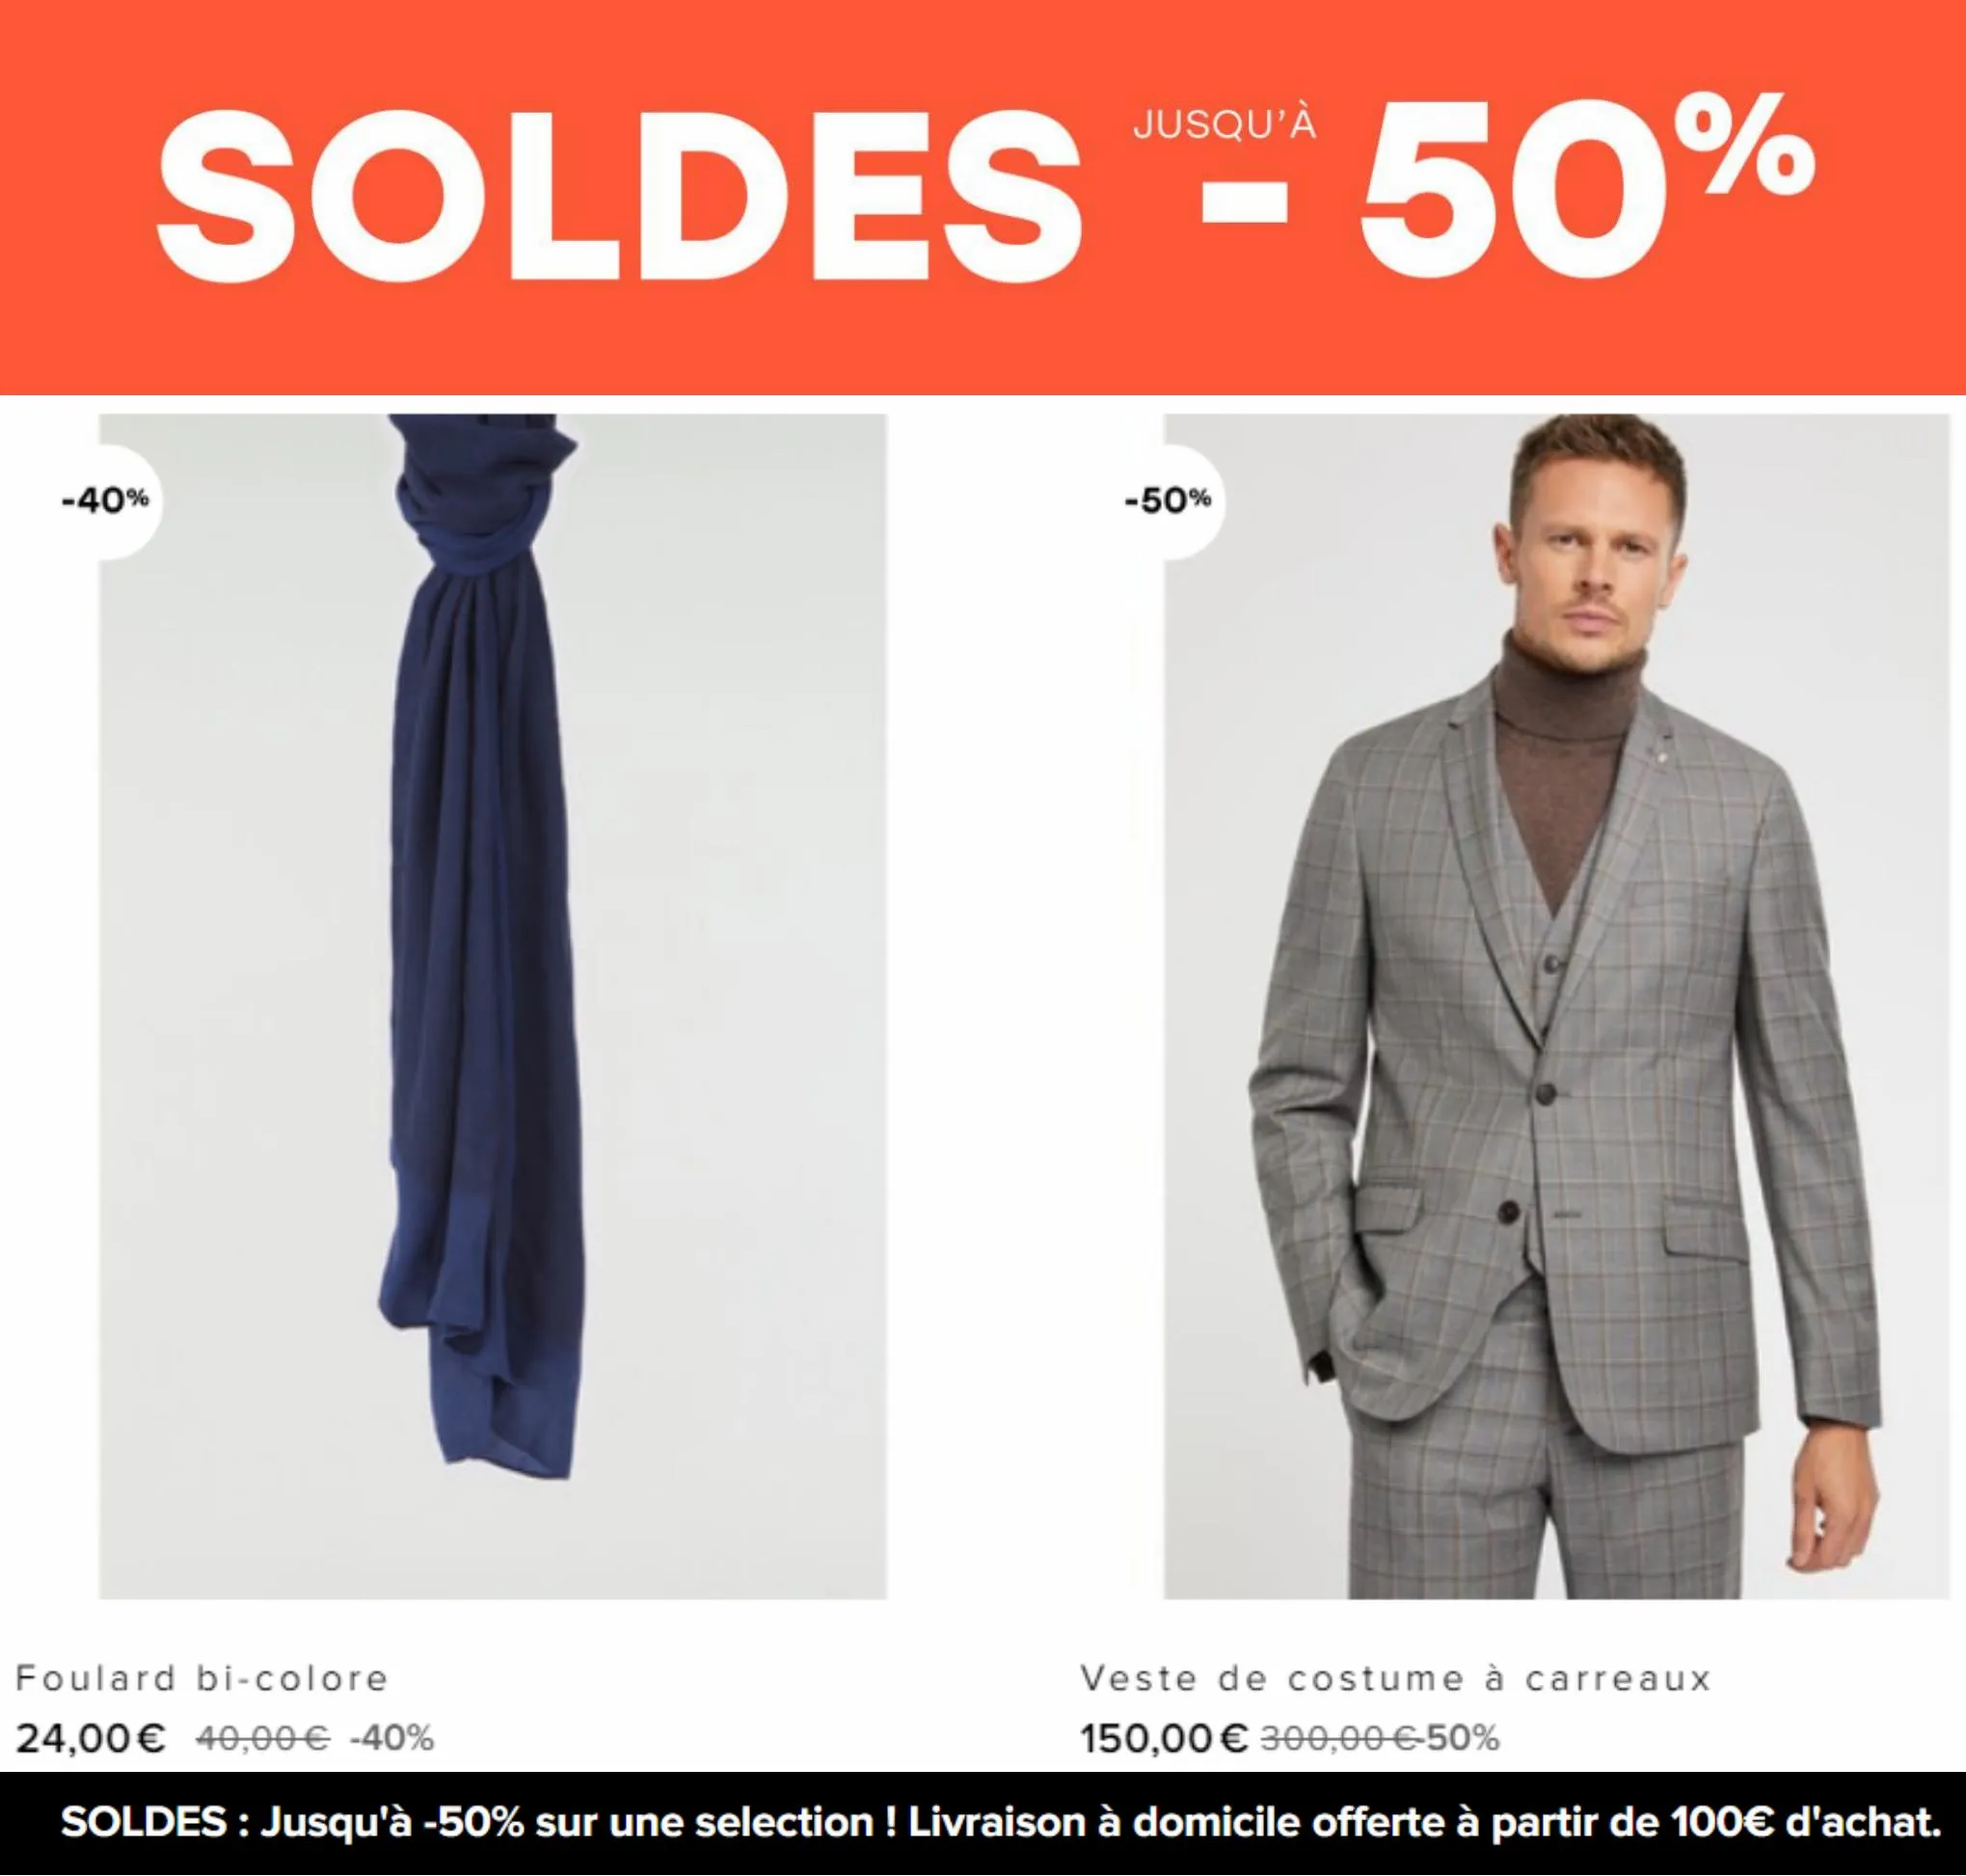 Catalogue Soldes -50% Homme, page 00005